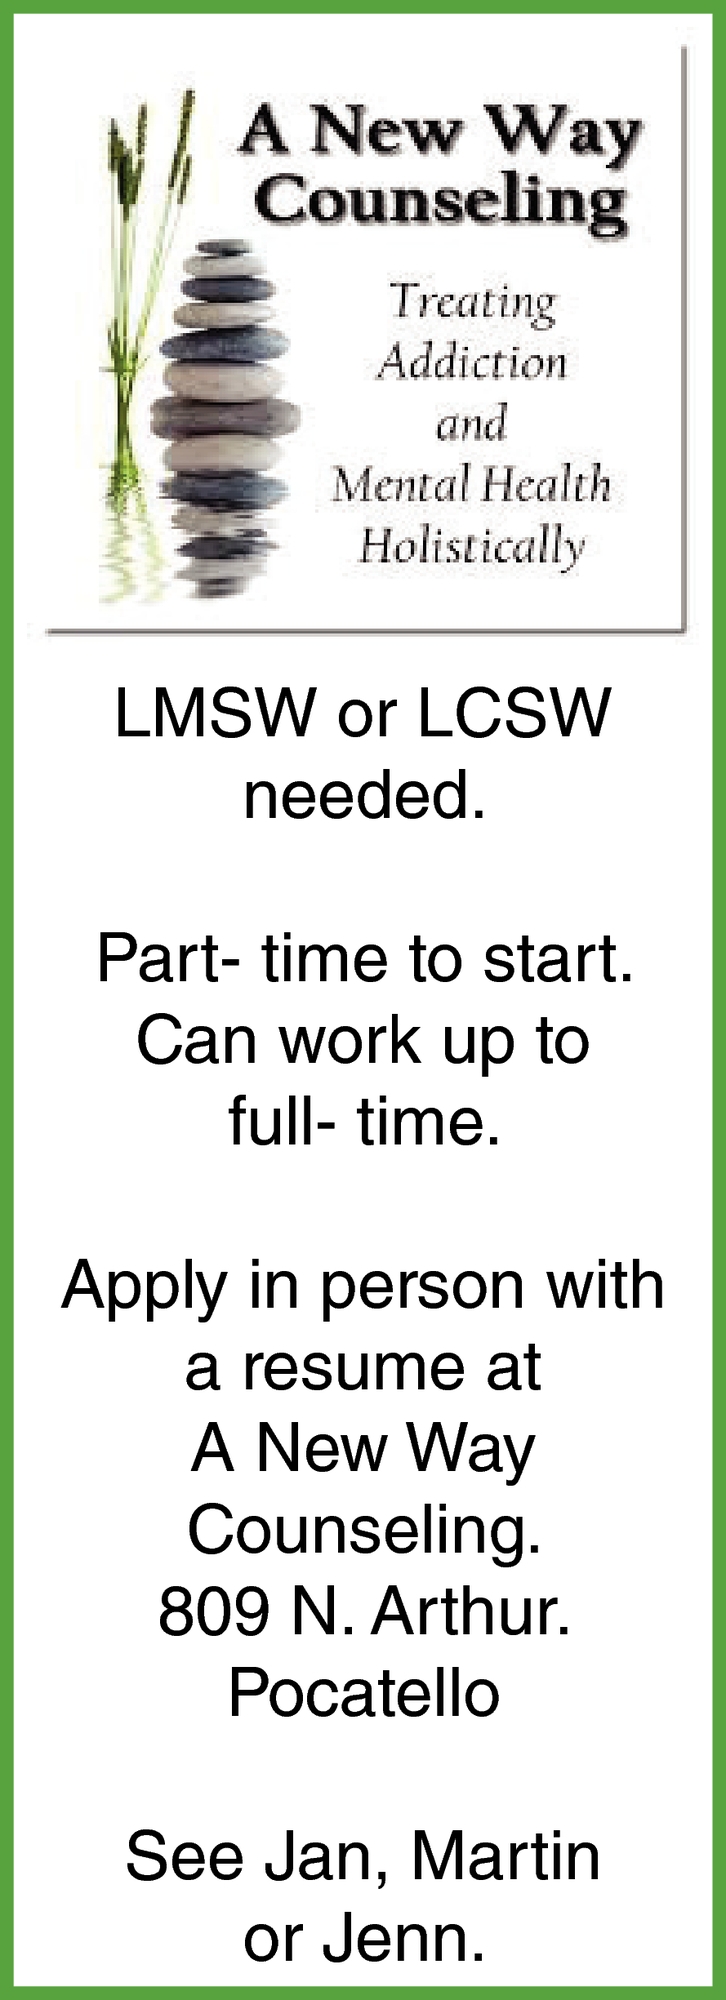 LMSW or LCSW 